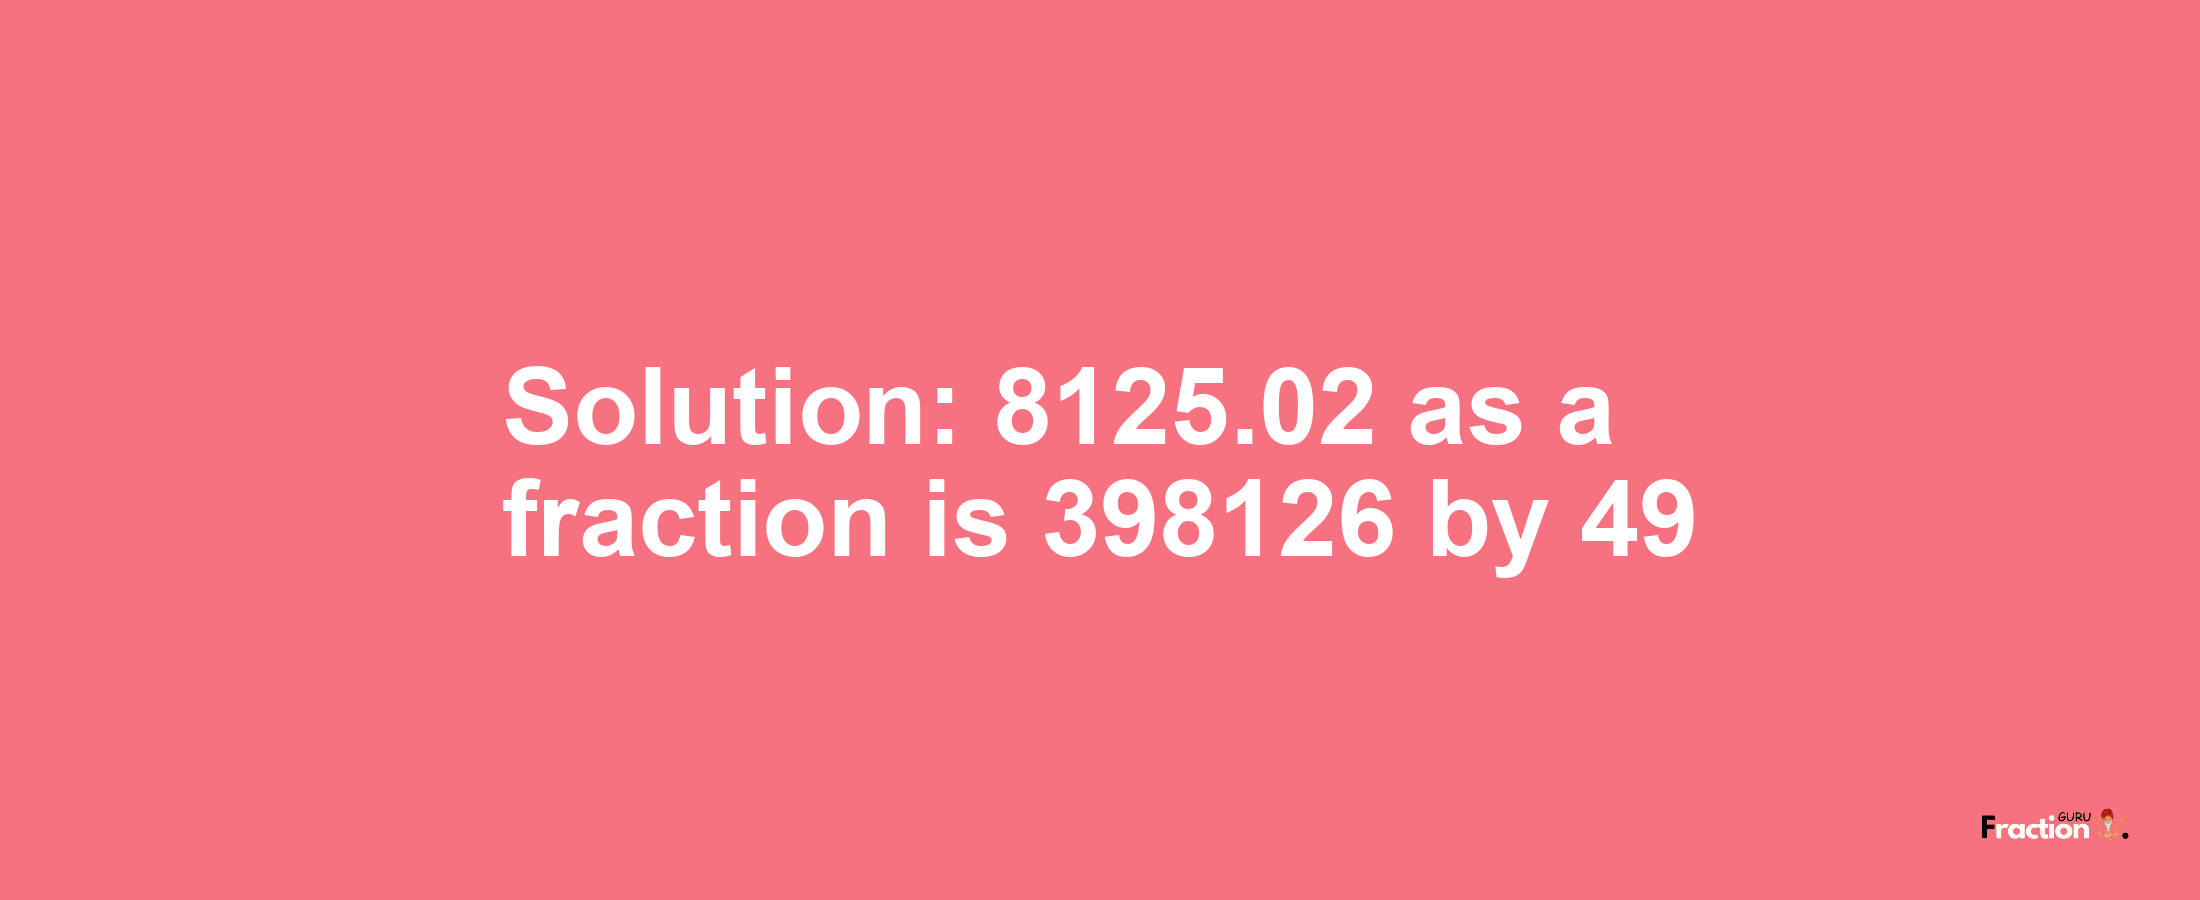 Solution:8125.02 as a fraction is 398126/49